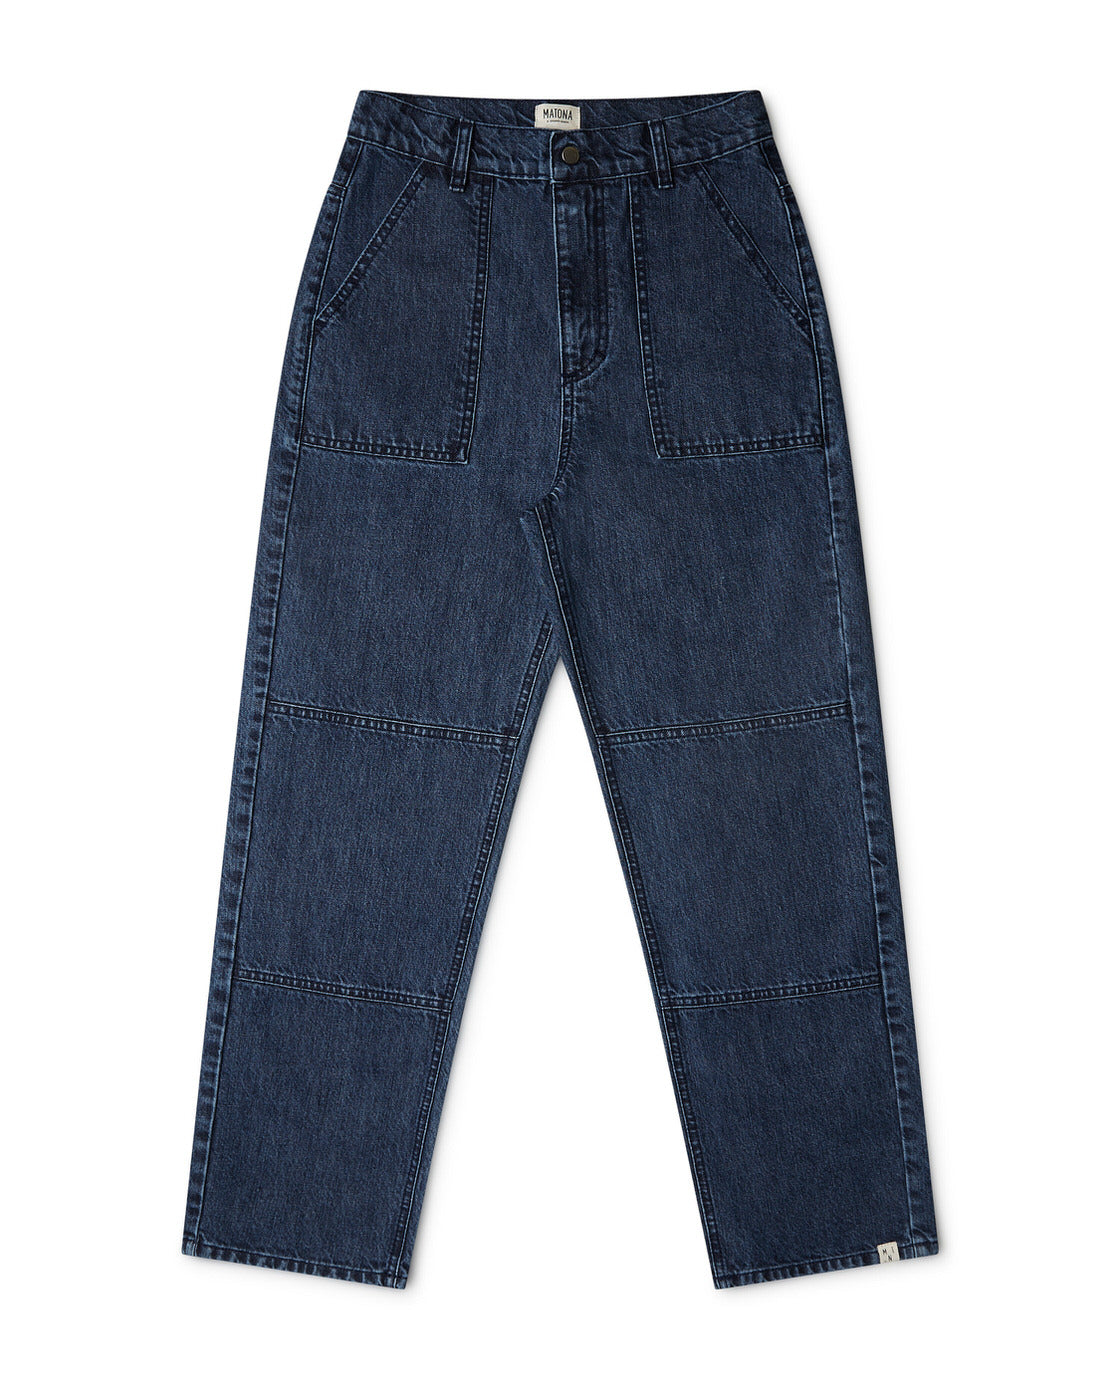 Blue jeans denim made from organic cotton by Matona